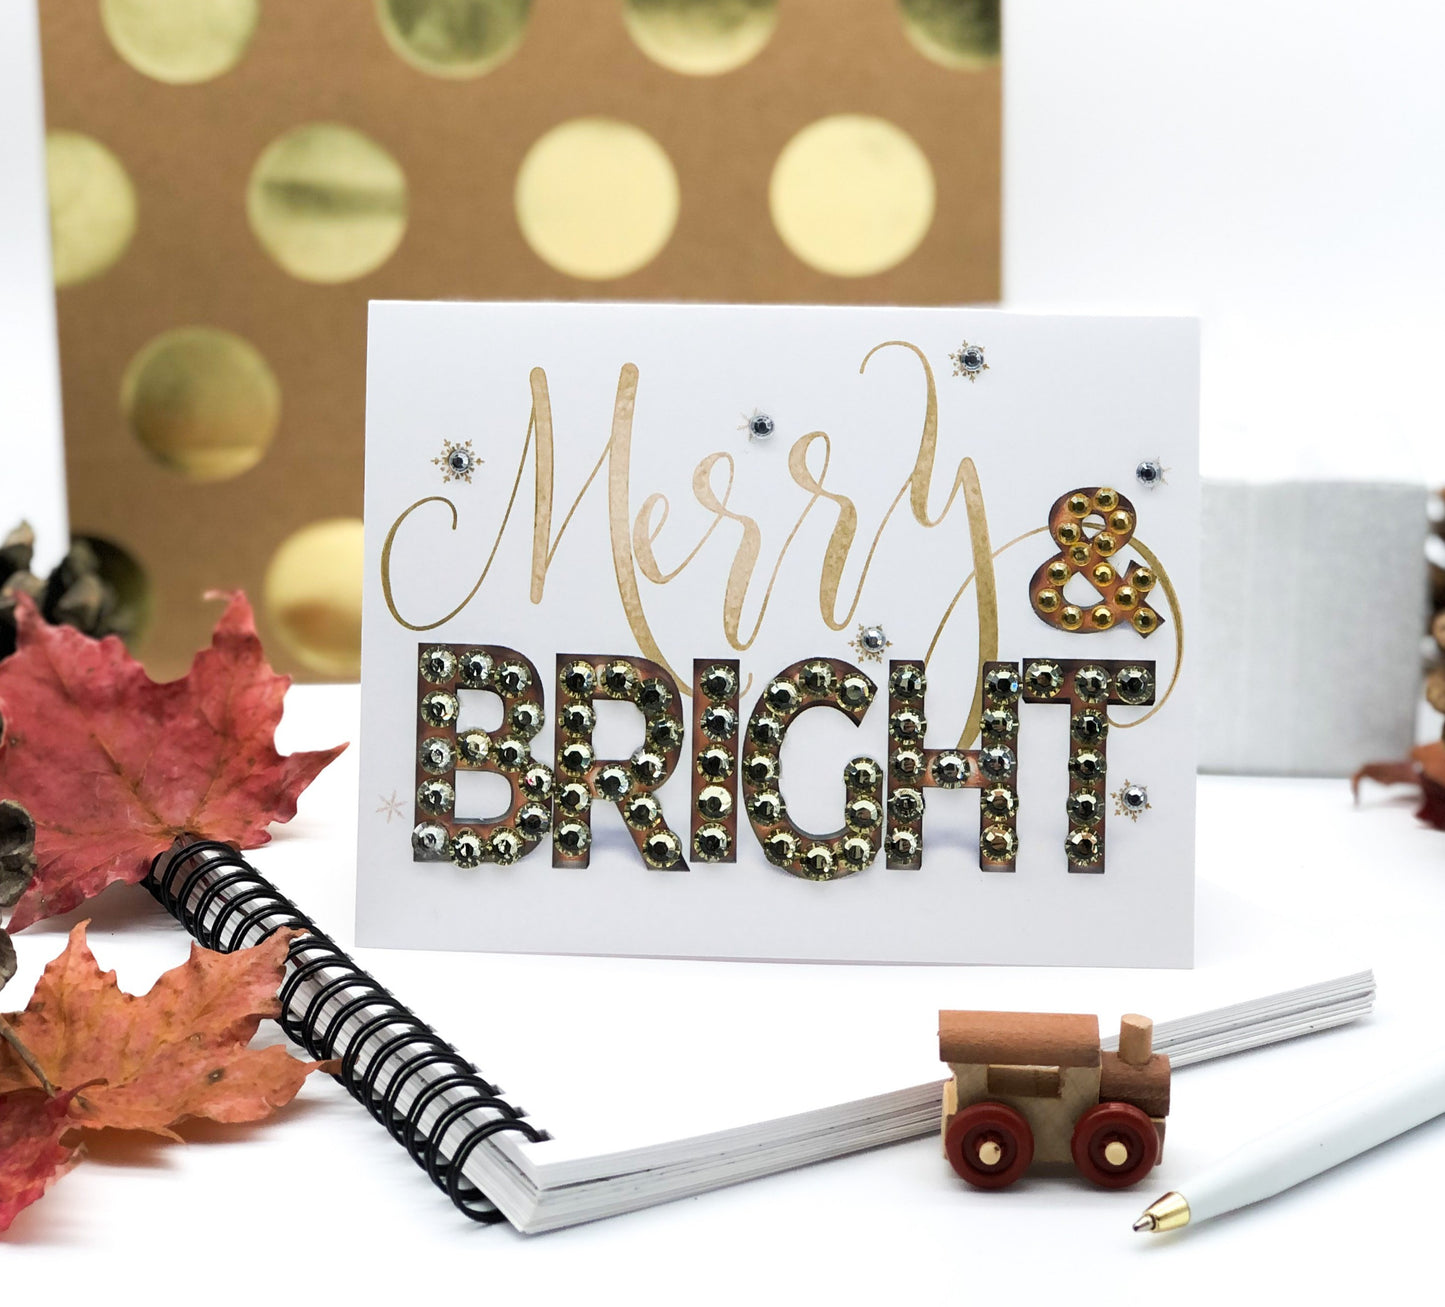 Merry Christmas - Merry & Bright! Greeting Card Gold